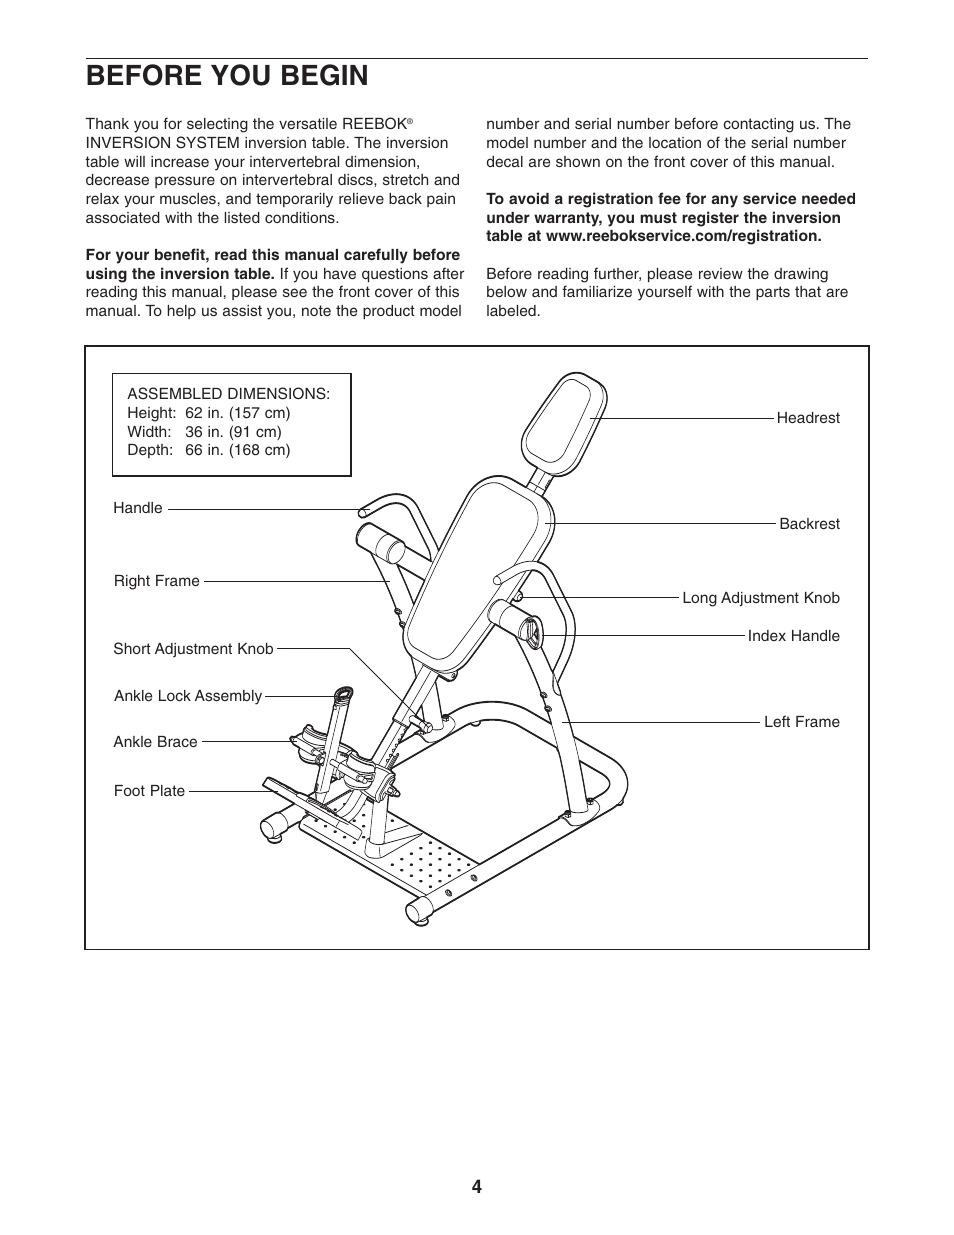 reebok inversion table instructions off 